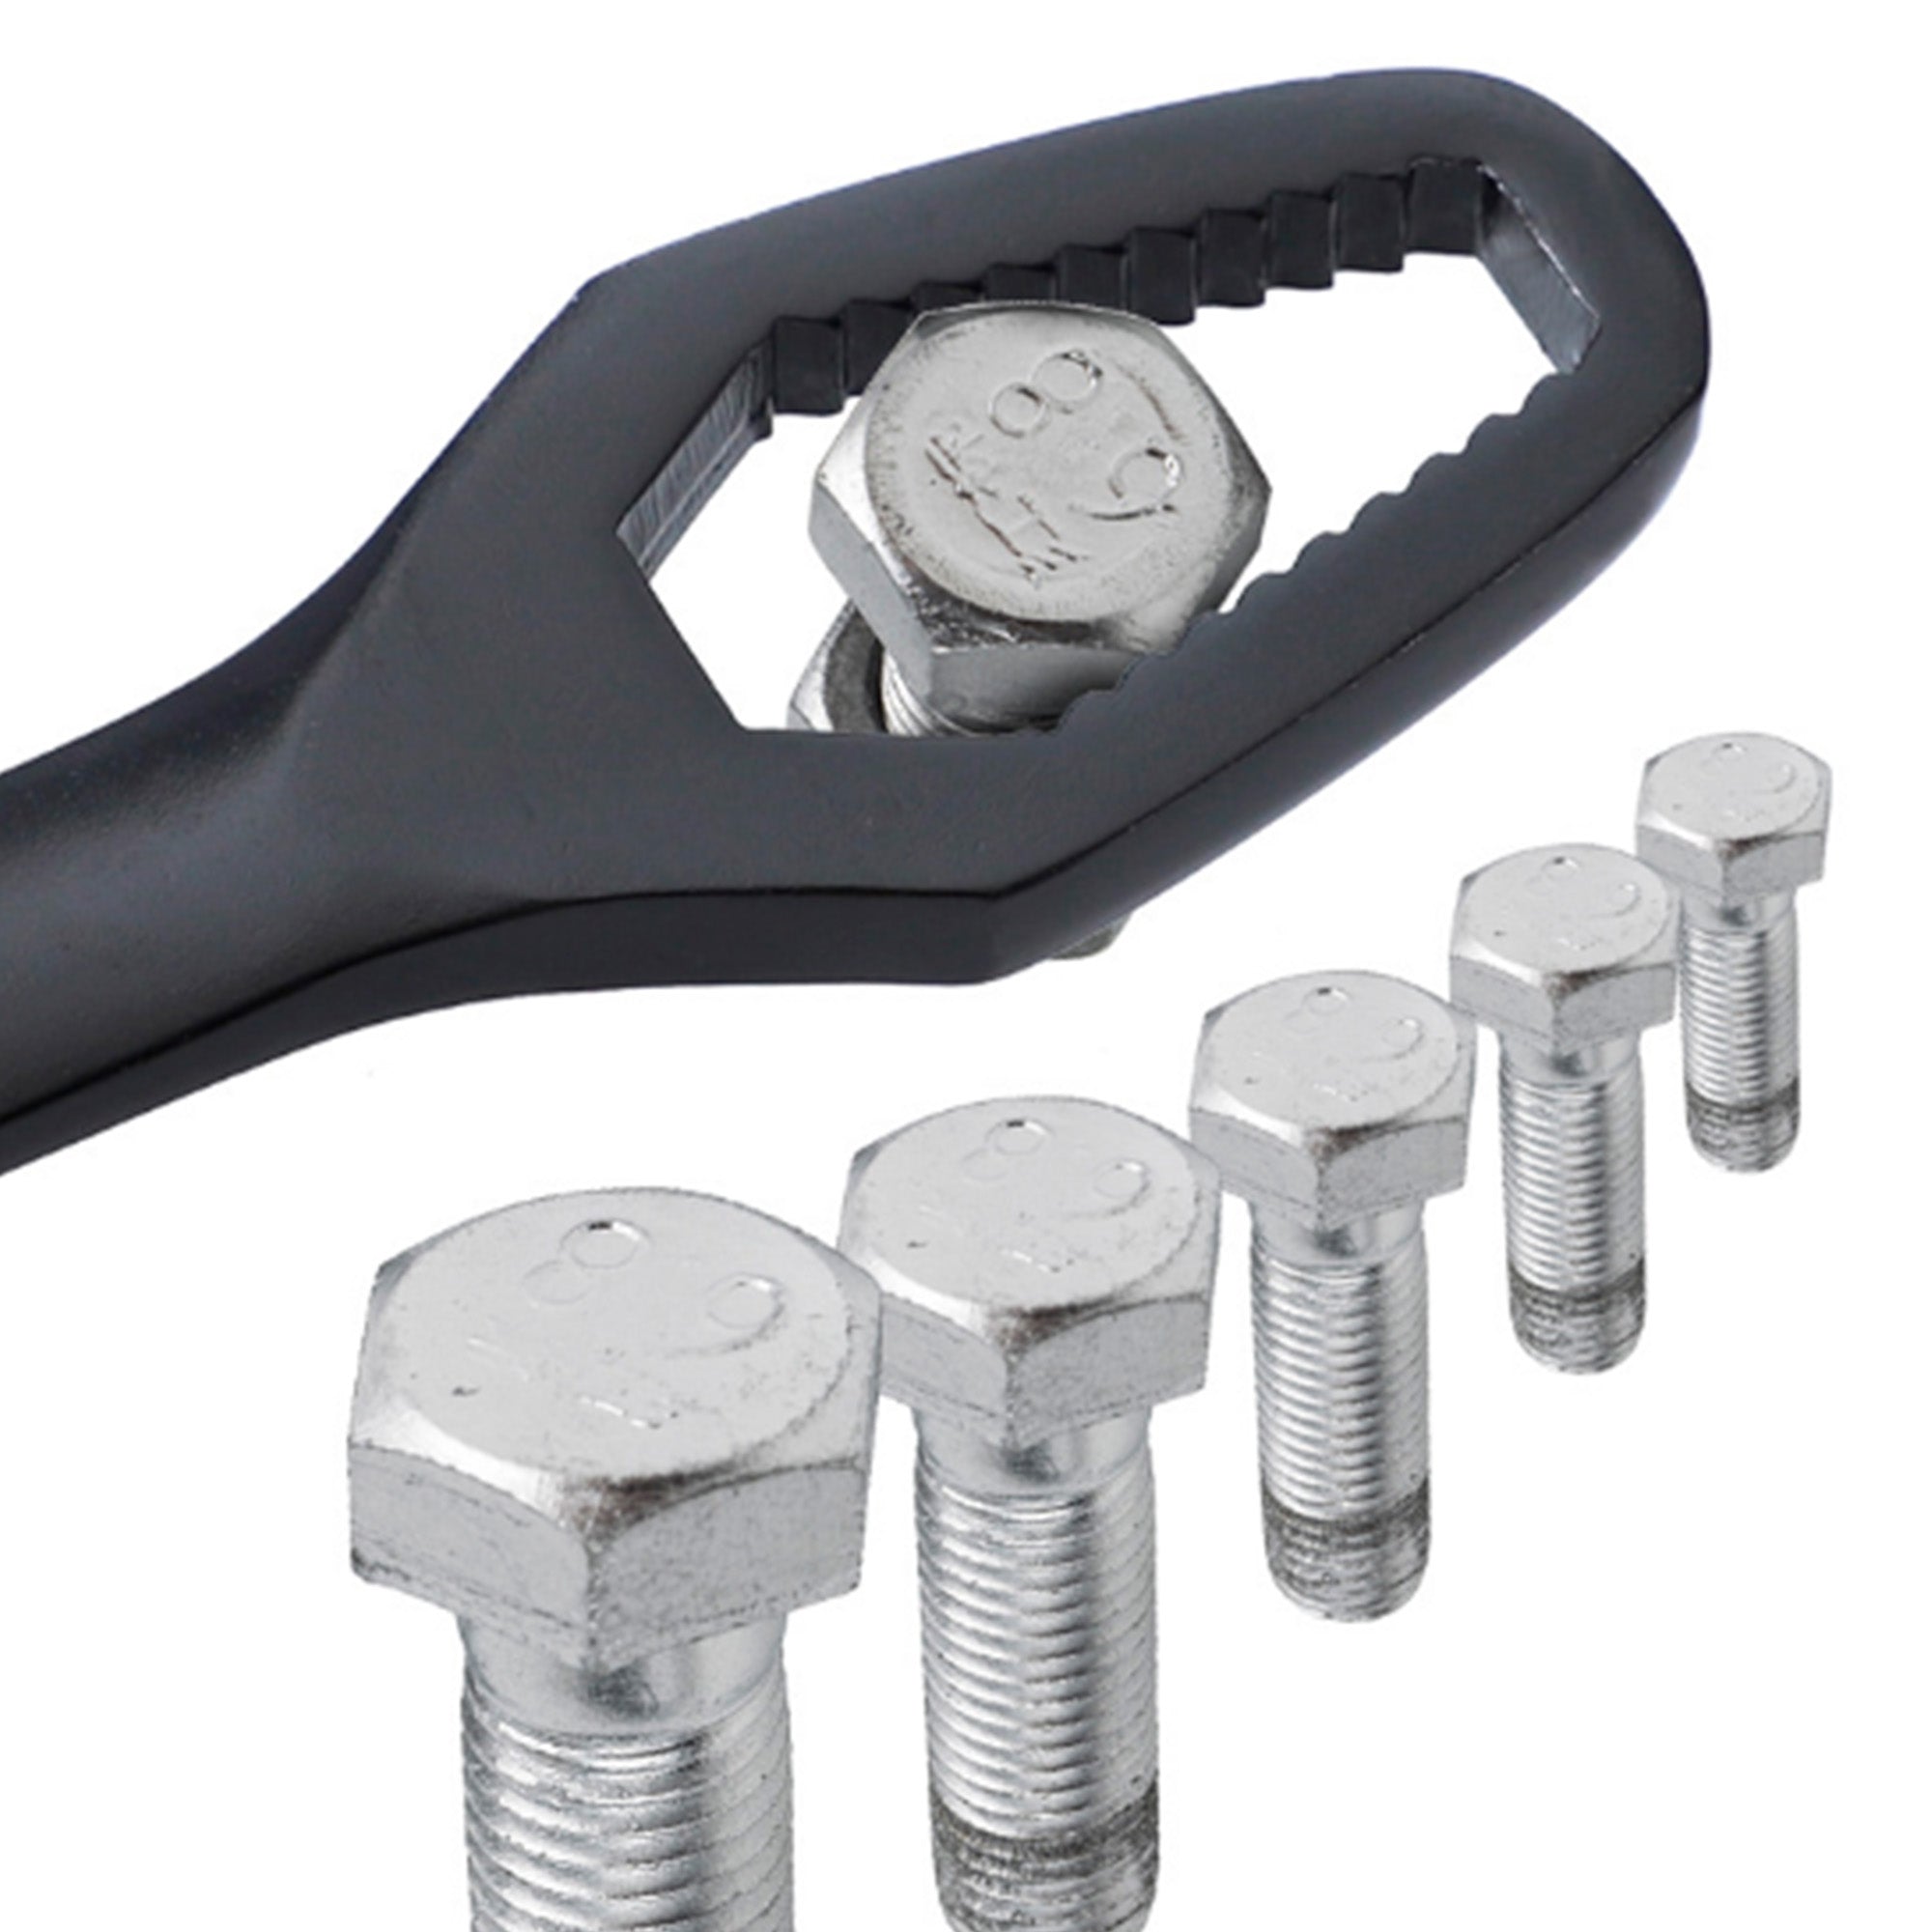 Double Wrench - Chiave inglese universale - BRICO EXPRESS